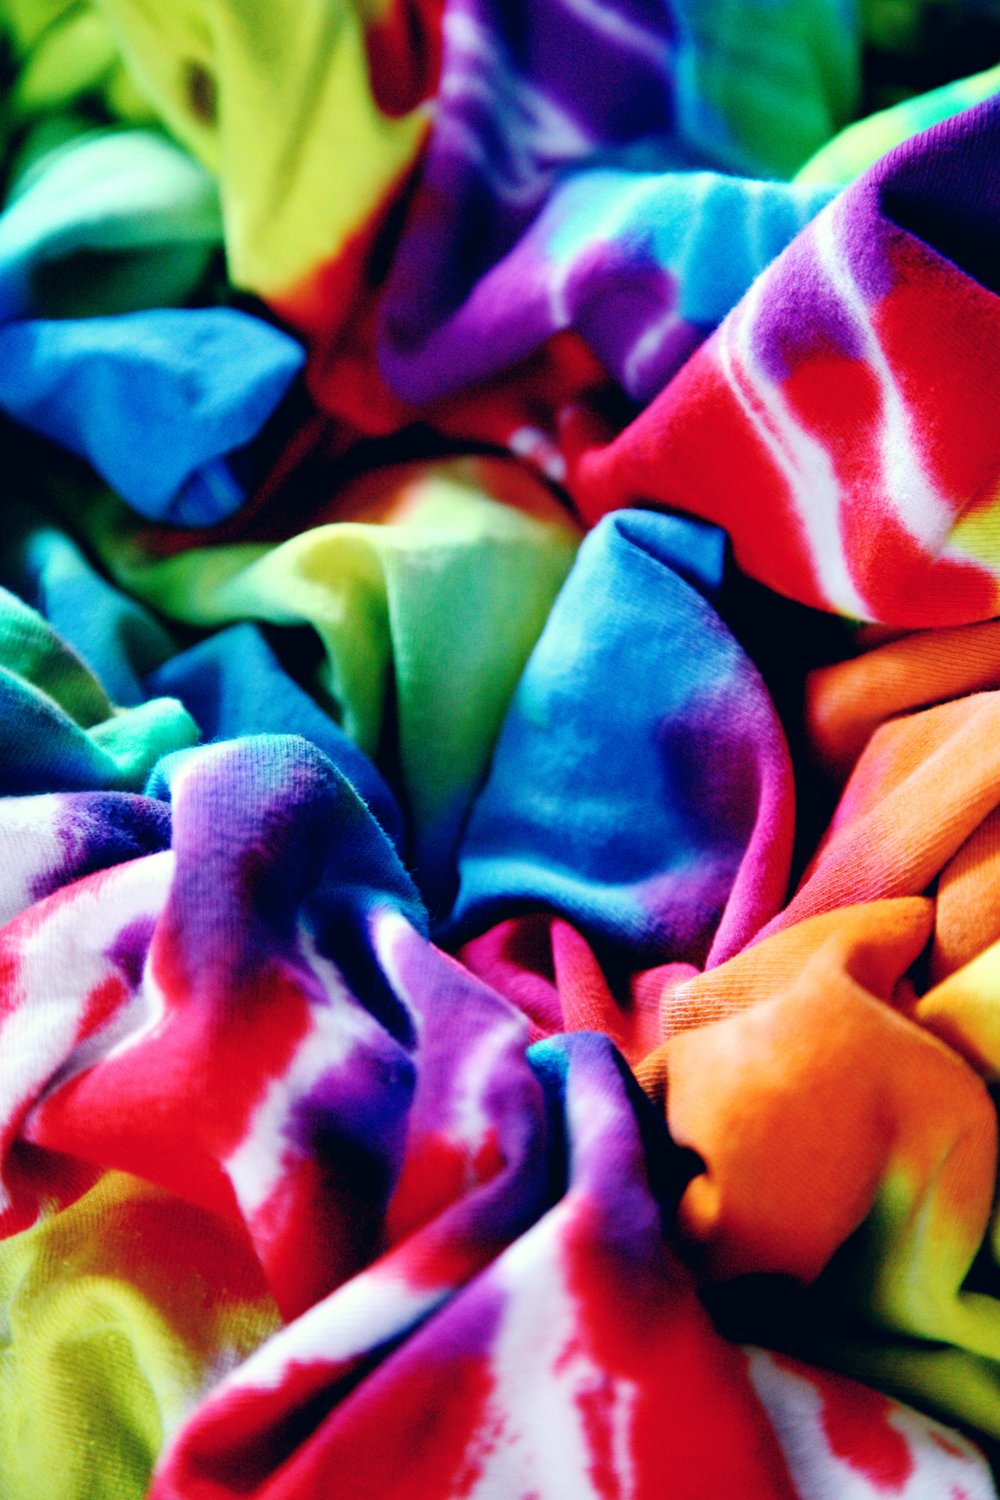 Colorful tie-dyed fabric